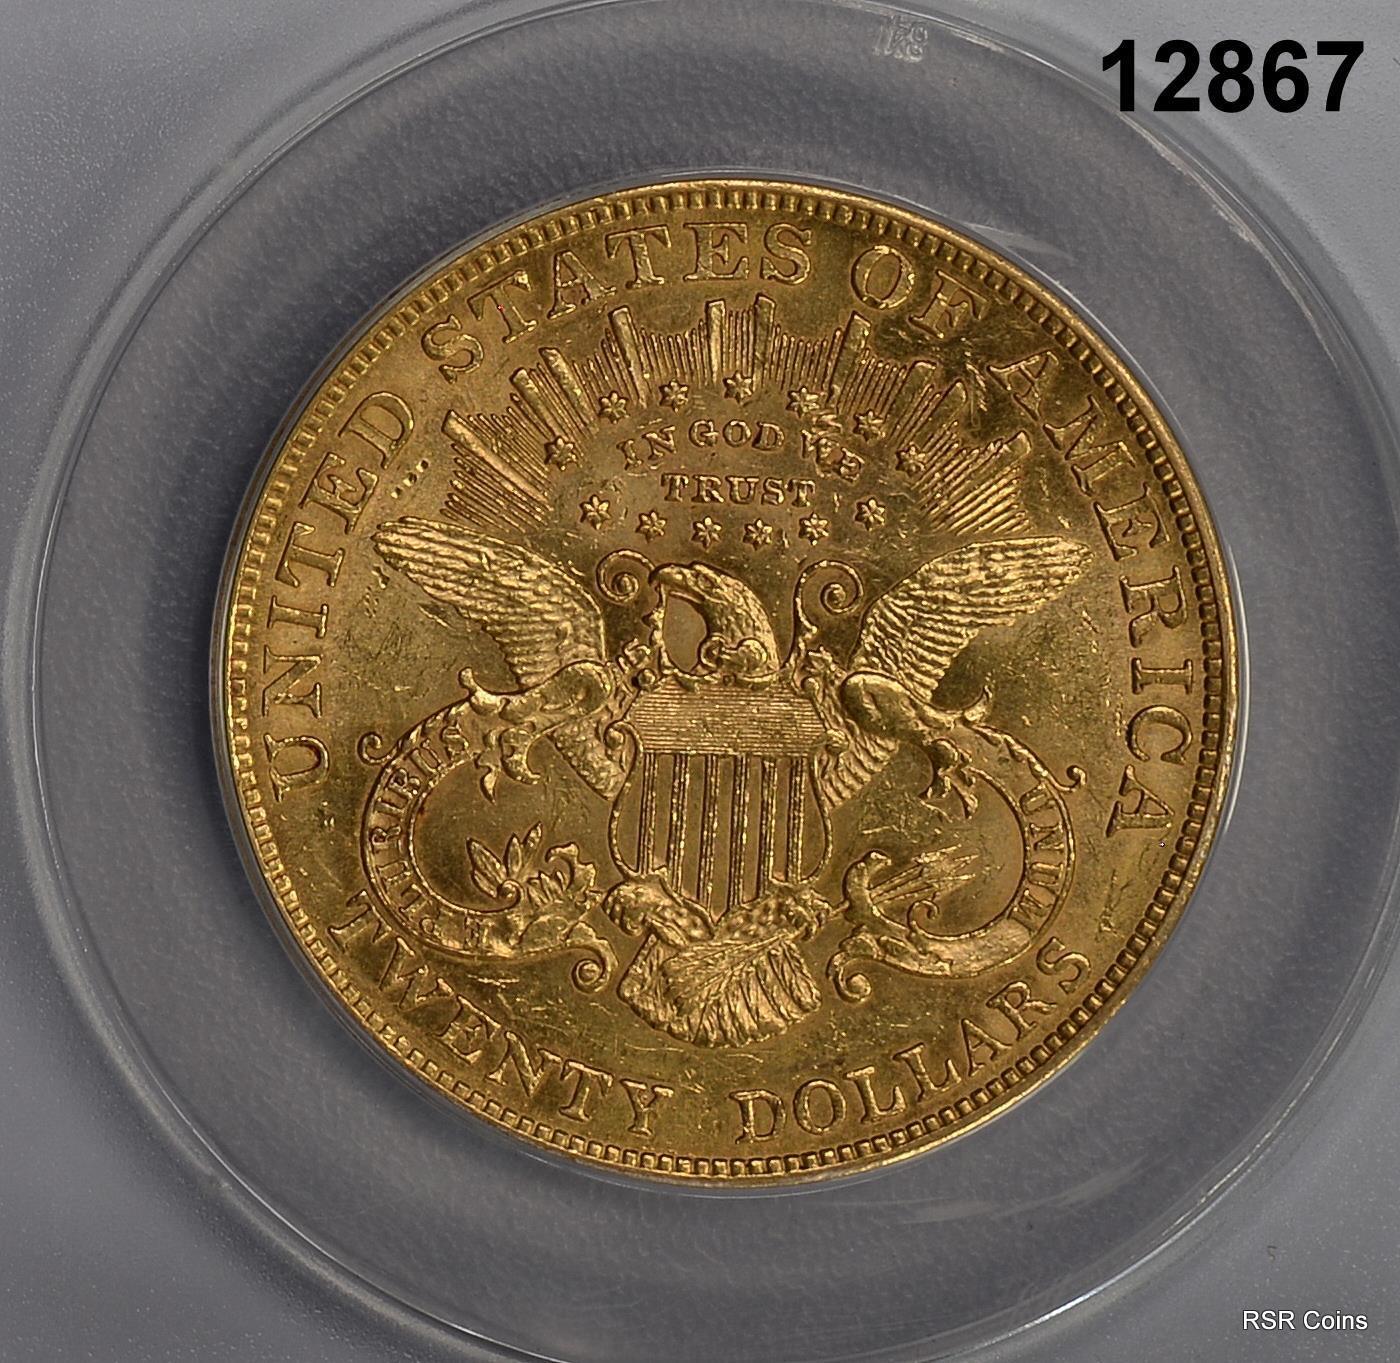 1904 $20 GOLD LIBERTY ANACS CERTIFIED AU55 LOOKS BETTER! #12867